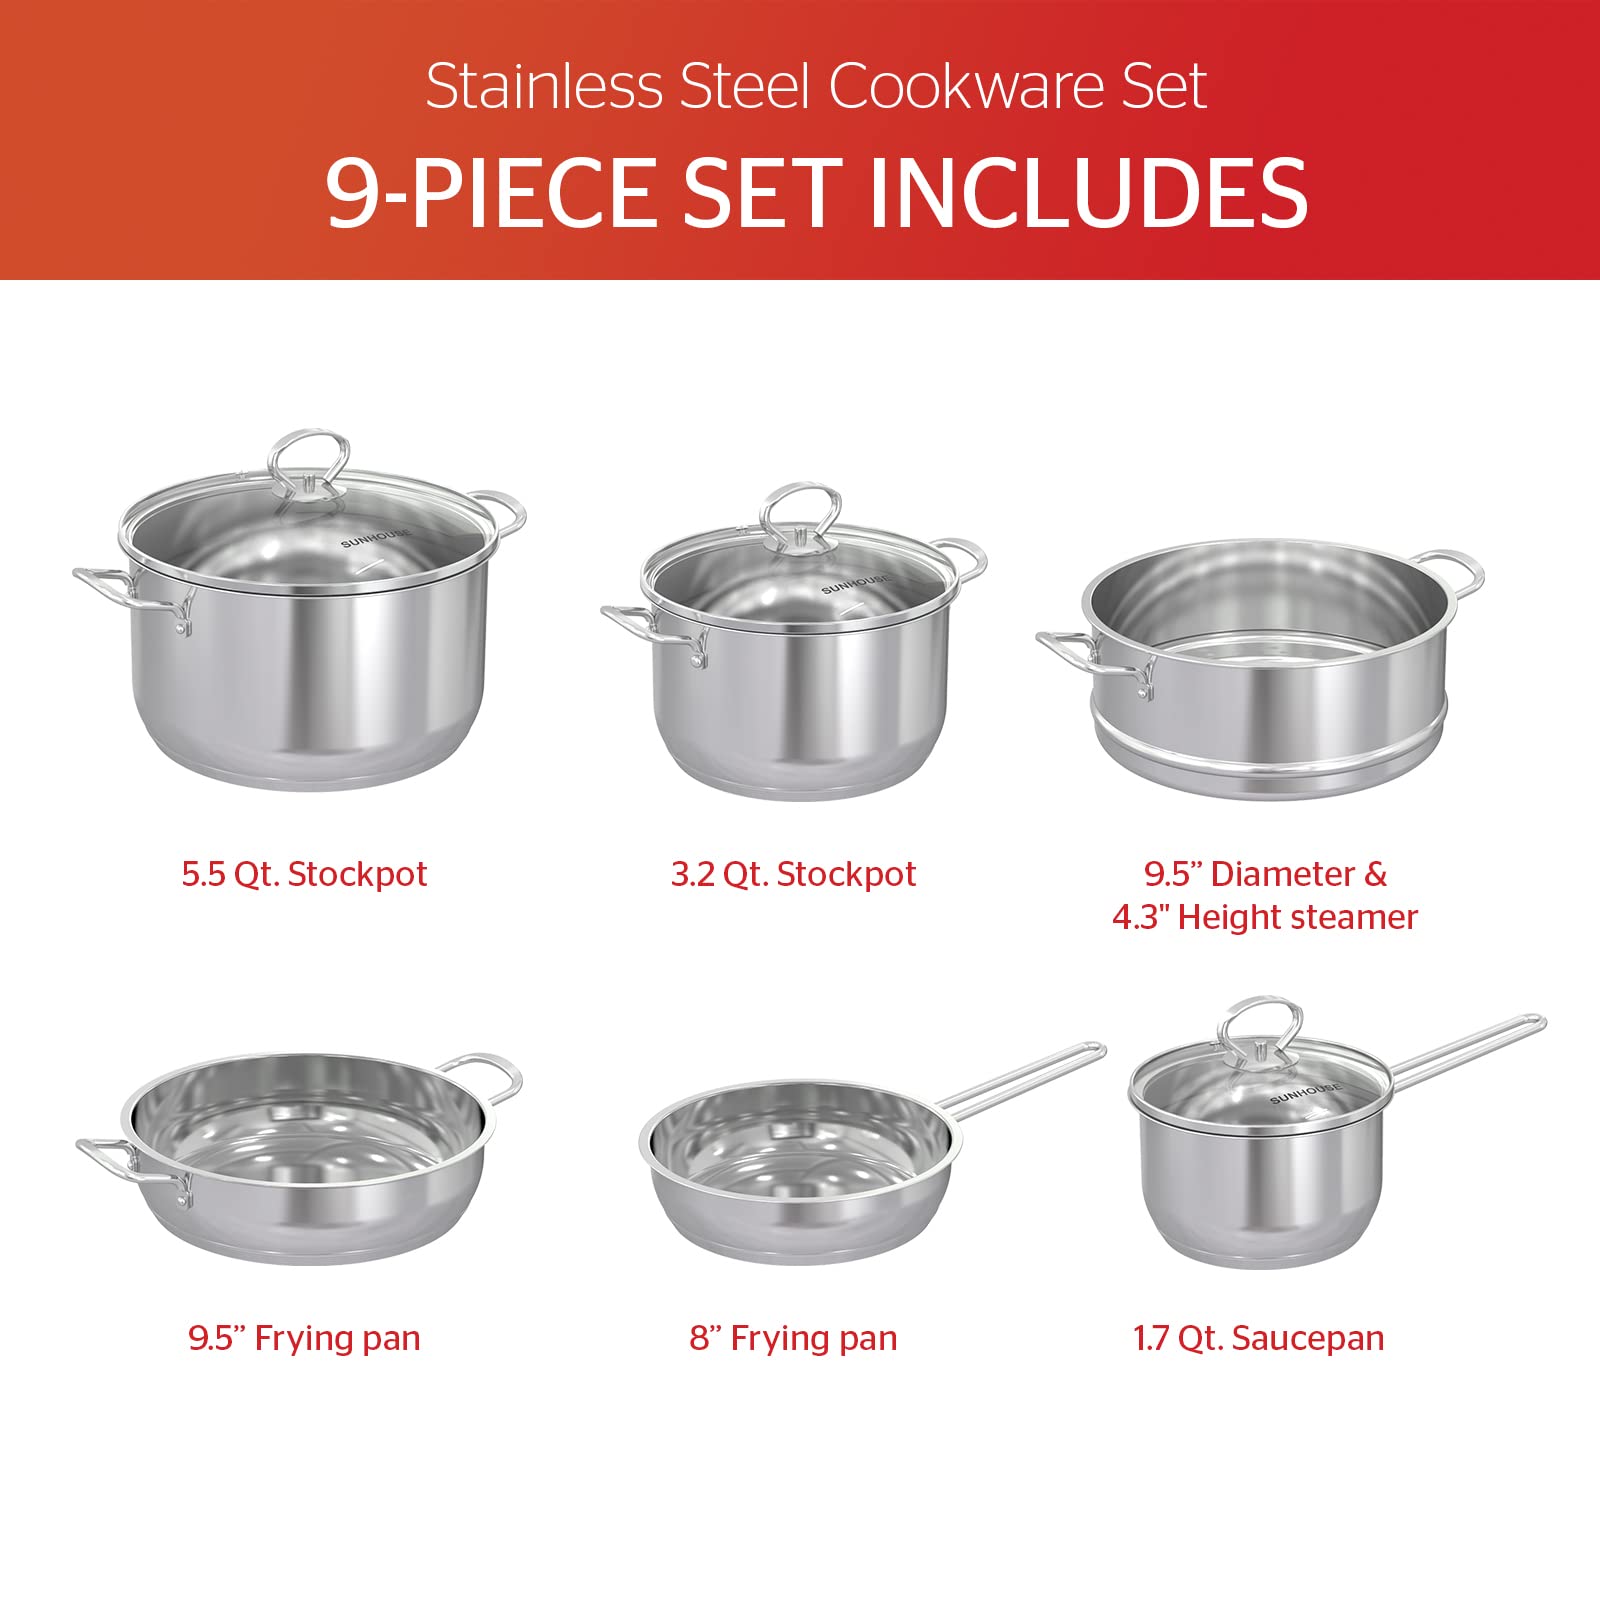 SUNHOUSE - Stainless Steel Cookware Set with PFOA-free, 18/10 Stainless Steel Pots and Pans Set - Tasty Cookware Set Including Saucepan, 2 Stock Pots, Steamer and 2 Frying Pans (9-Pieces Cookware Set)